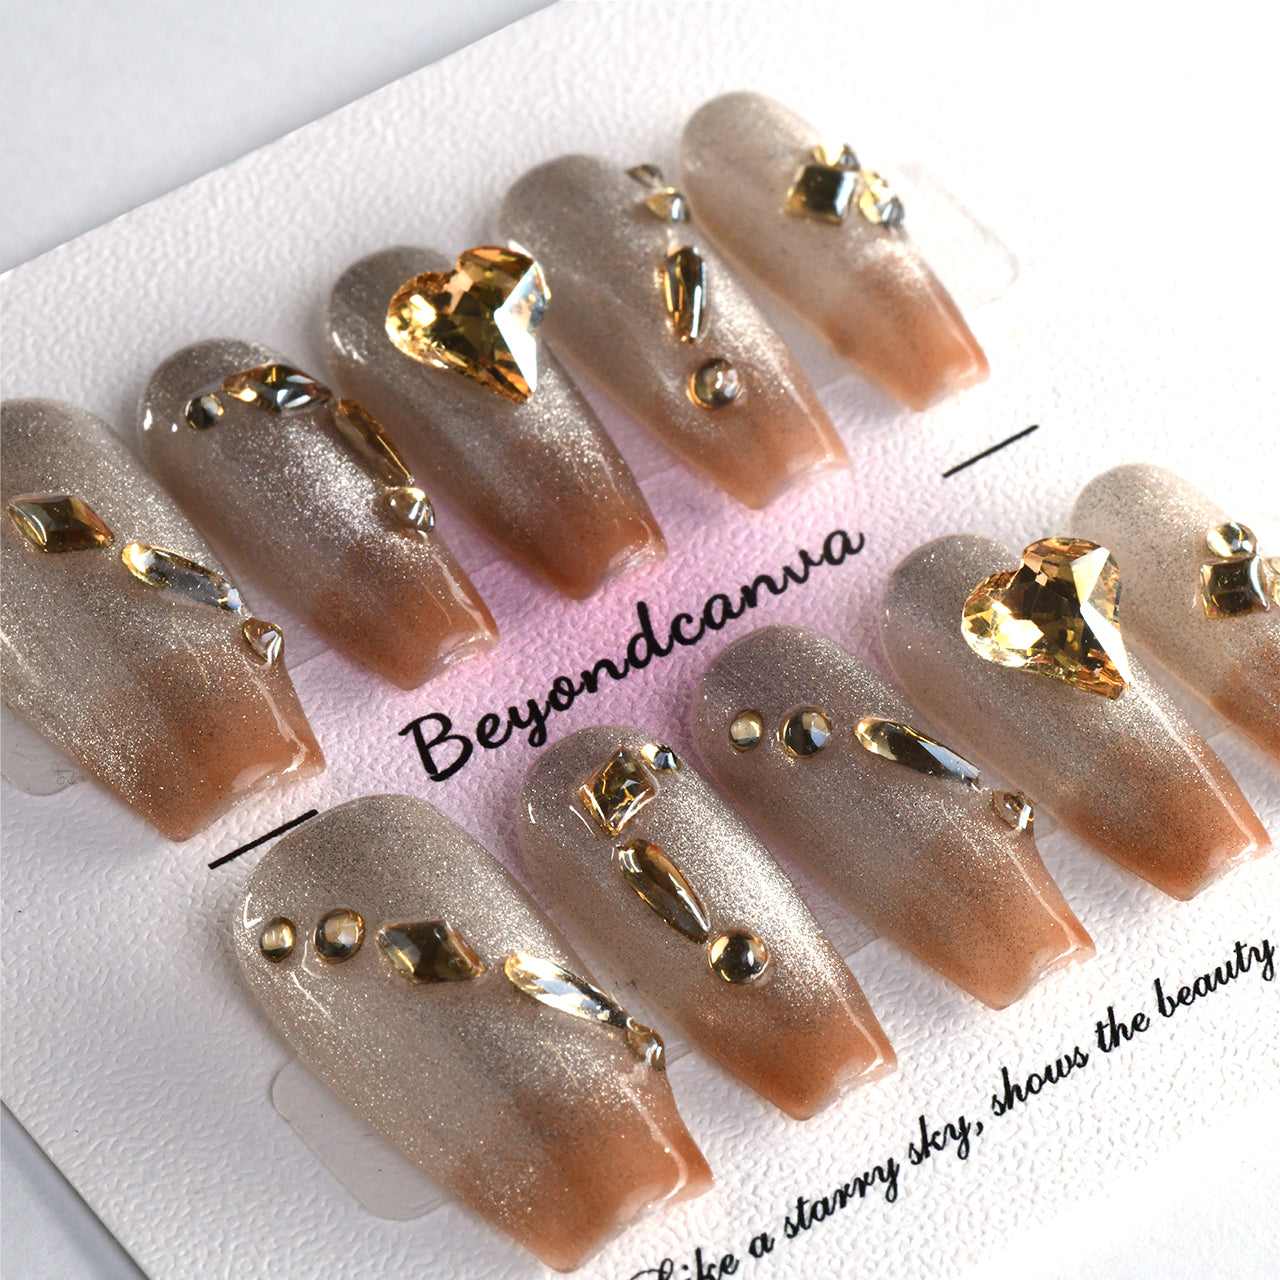 Sparkle Brown Long Coffin Ombre Nude Handmade Press On Nails With Diamond-BEYONDCANVA